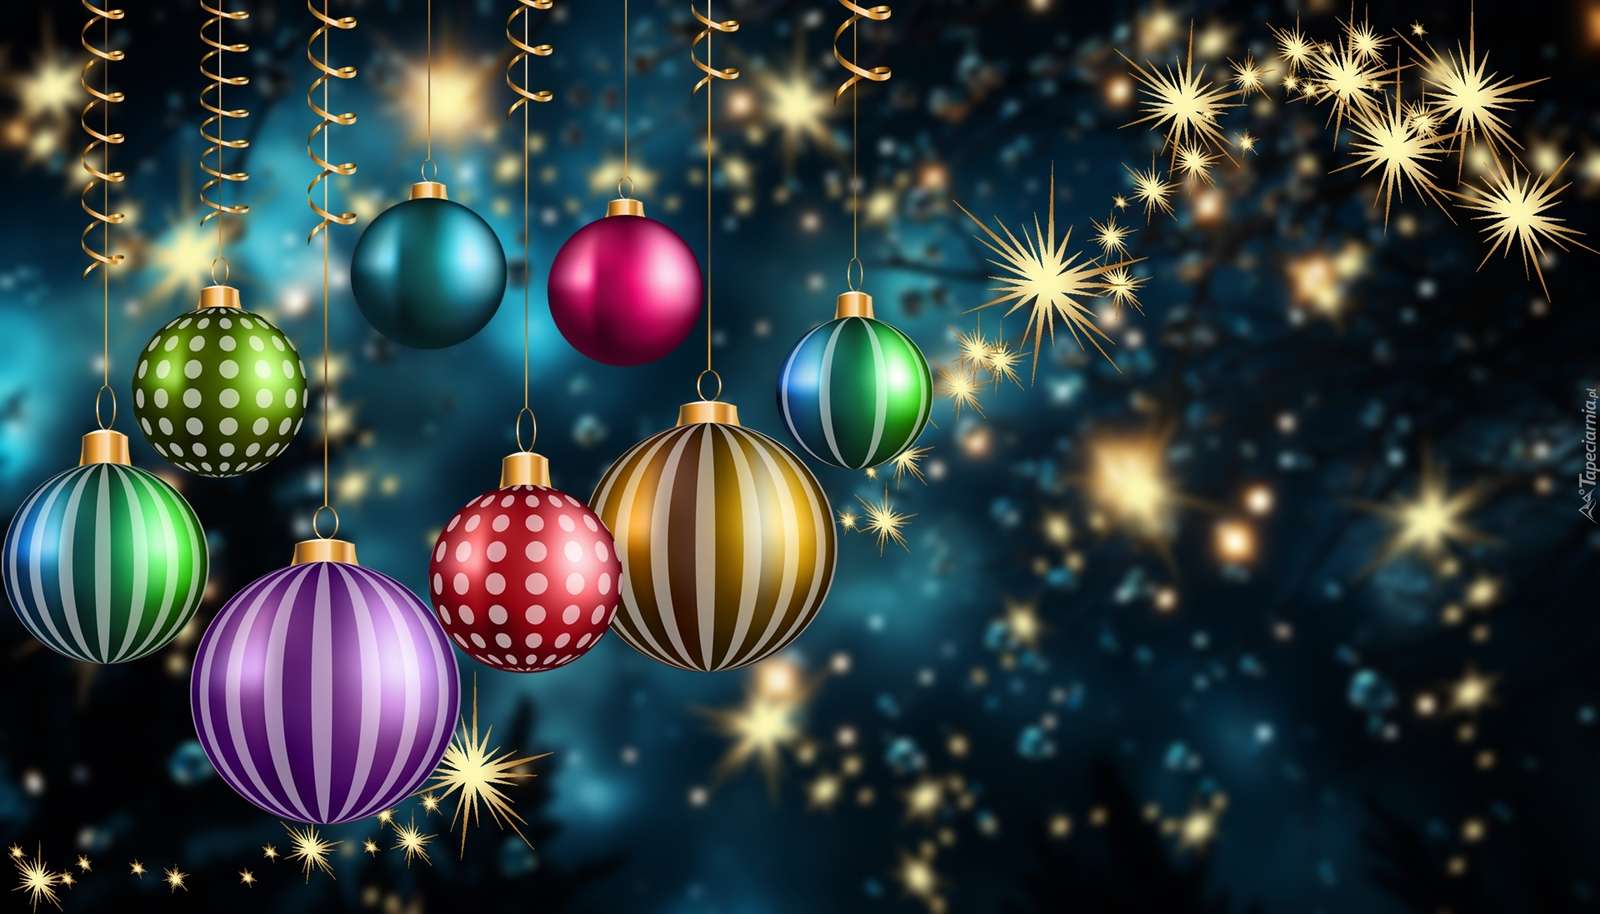 Baubles among the stars jigsaw puzzle online